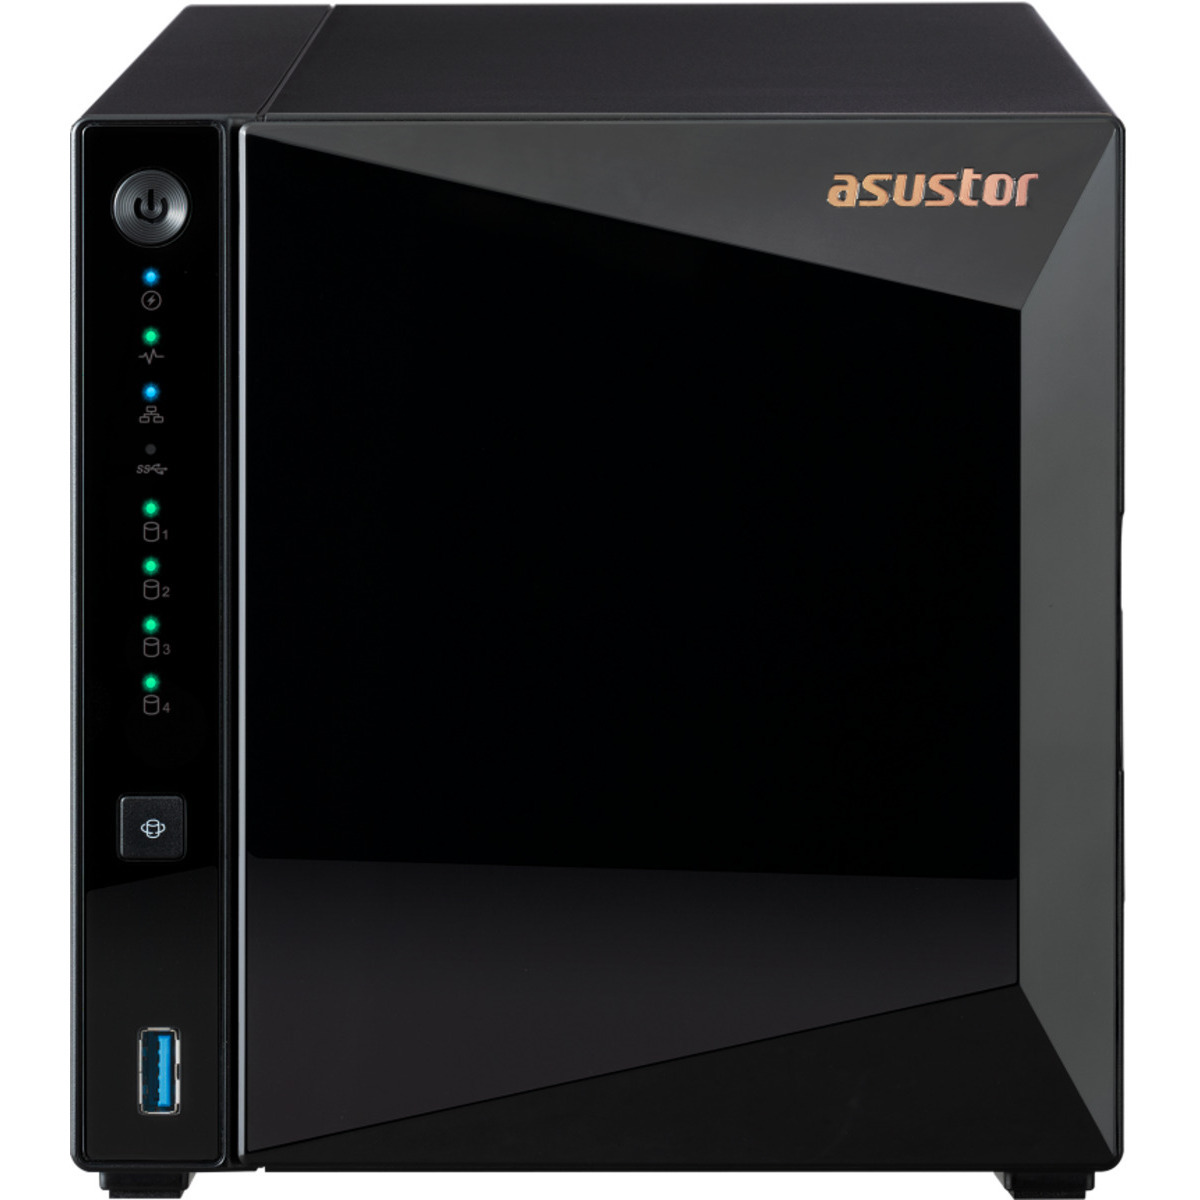 ASUSTOR DRIVESTOR 4 Pro AS3304T 80tb 4-Bay Desktop Personal / Basic Home / Small Office NAS - Network Attached Storage Device 4x20tb Seagate IronWolf Pro ST20000NT001 3.5 7200rpm SATA 6Gb/s HDD NAS Class Drives Installed - Burn-In Tested DRIVESTOR 4 Pro AS3304T